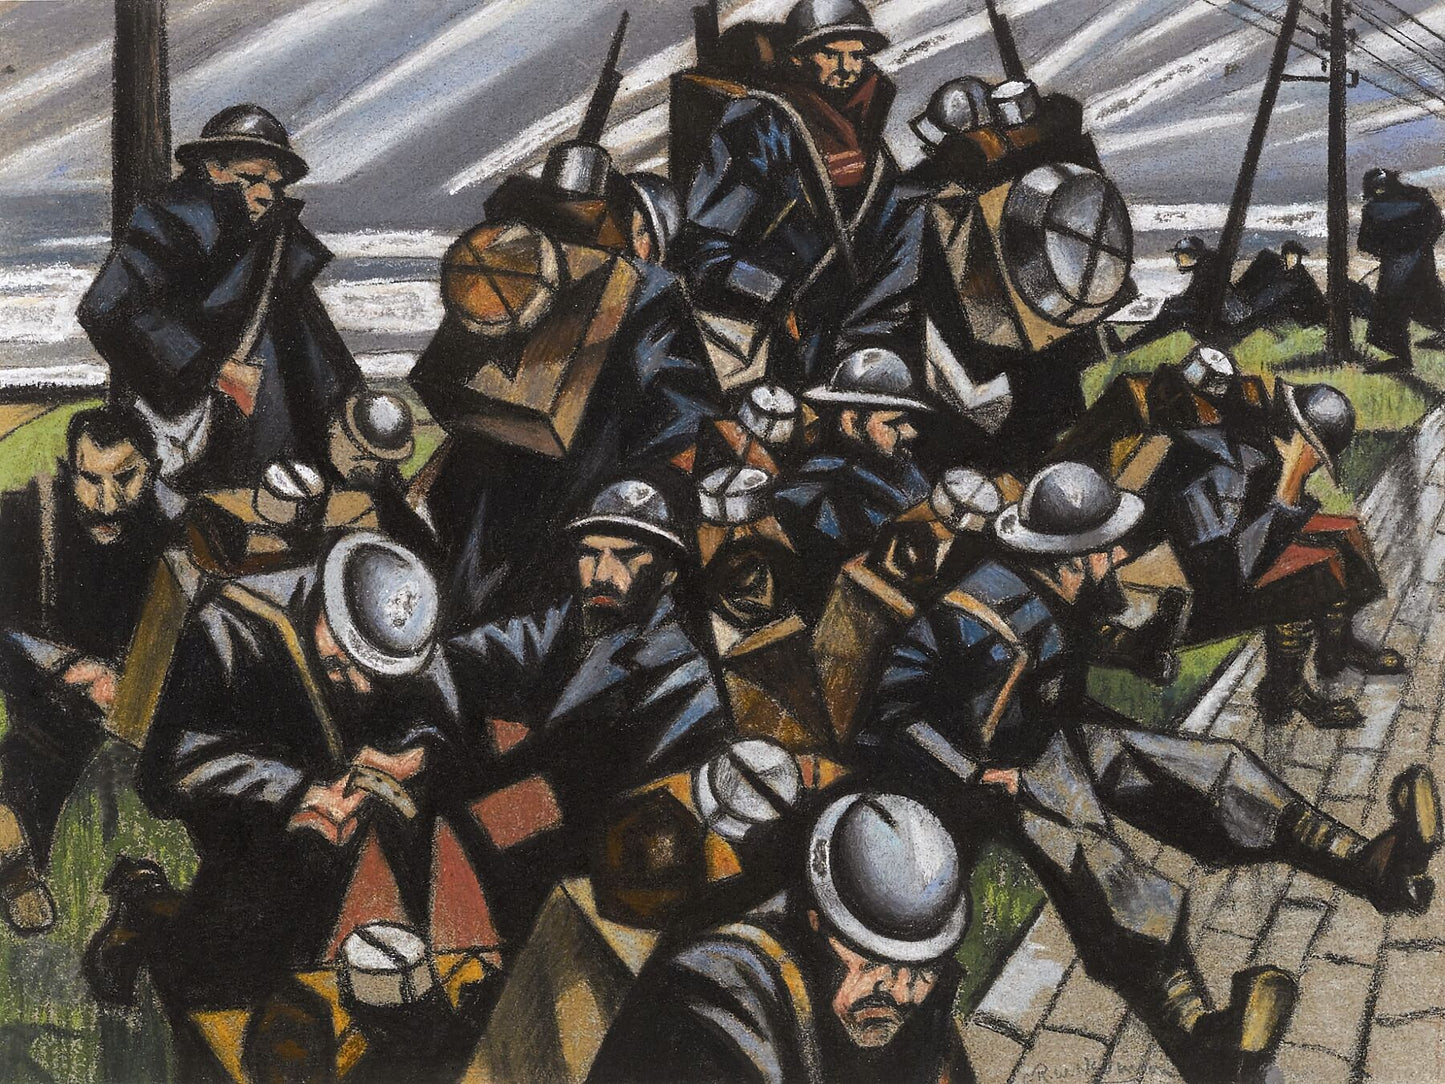 Troops Resting by Christopher Richard Wynne Nevinson - 1916